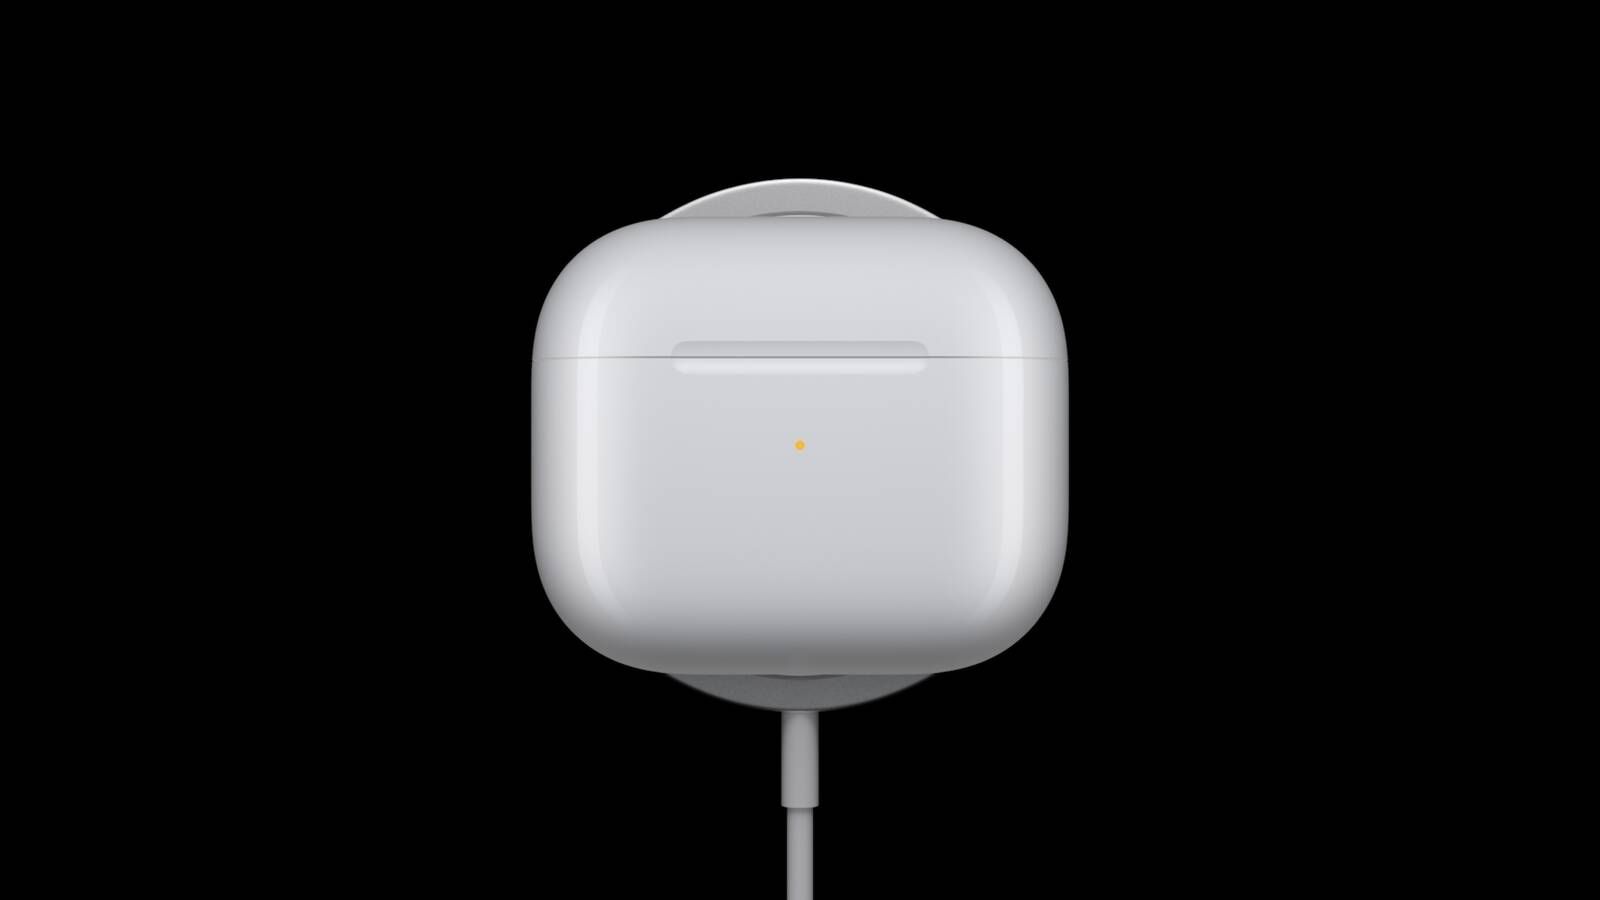 AirPods Pro Now With MagSafe for Same $249 Price - MacRumors